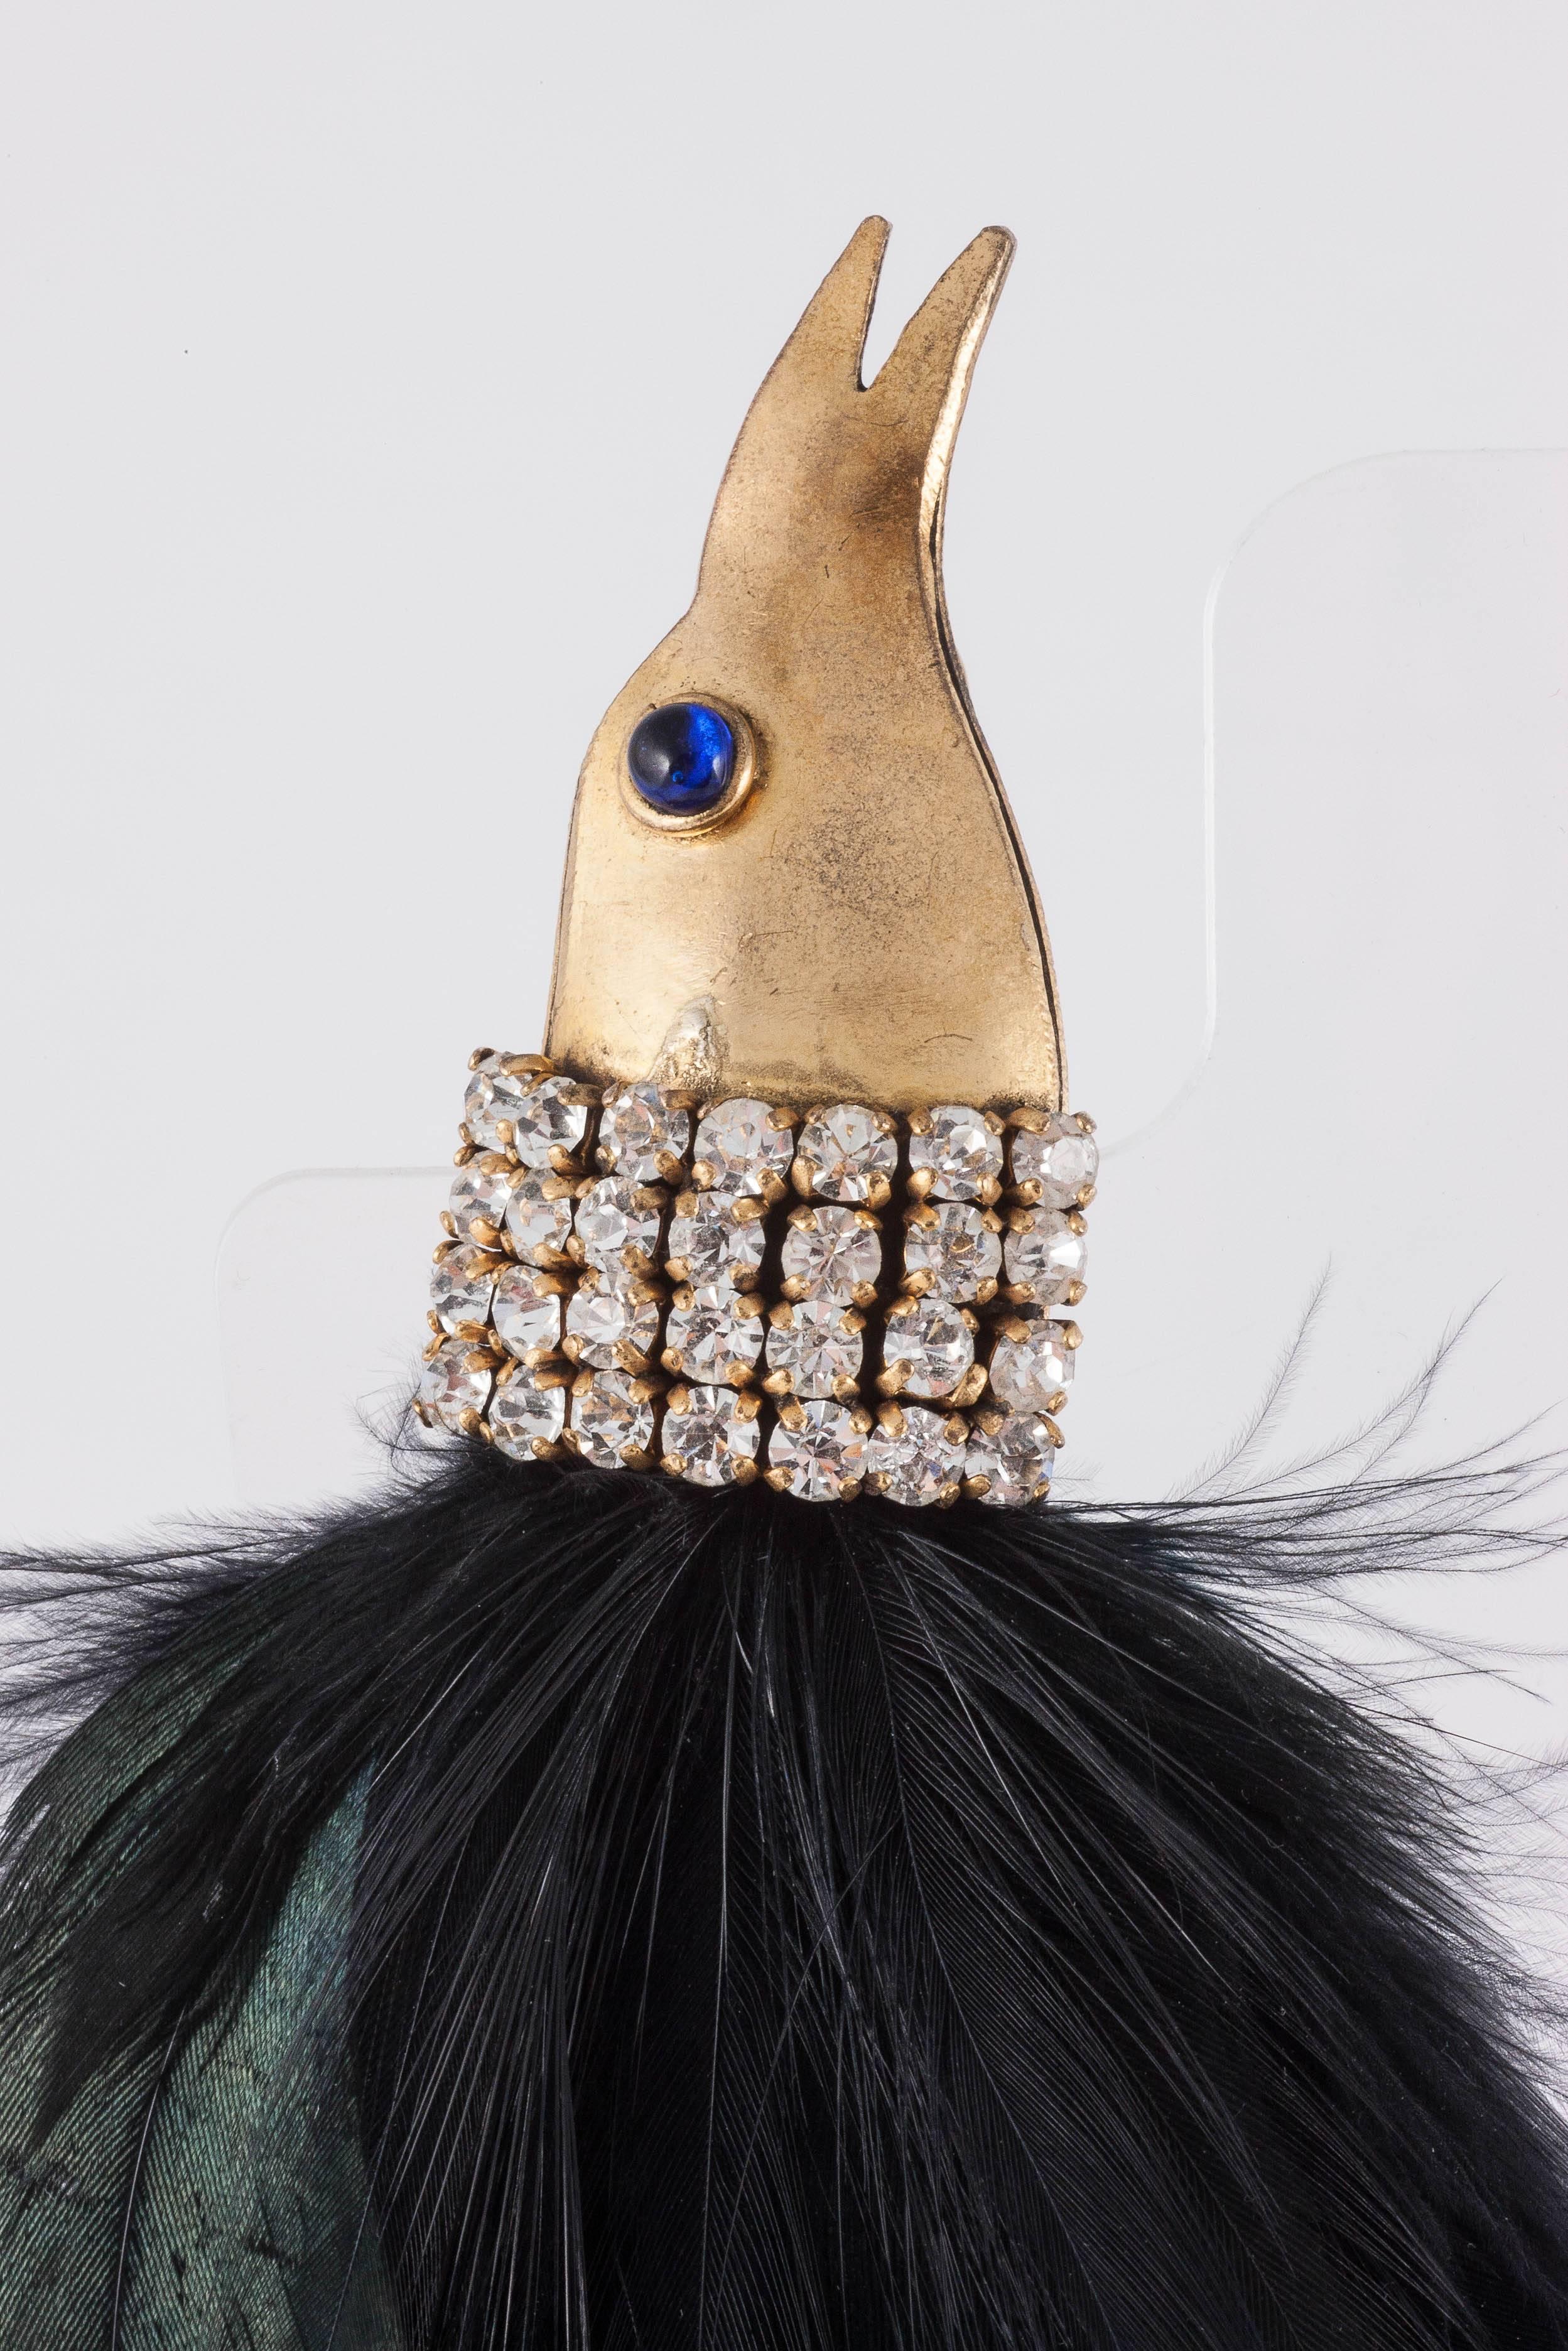 Magnificent and opulent large 'Bird Of Paradise' earrings by Isabel Canovas, made from gilded metal and lush feathers with clear and sapphire paste highlights. The earrings are naturally clip on and hang down , with the bird's head on the earlobe,